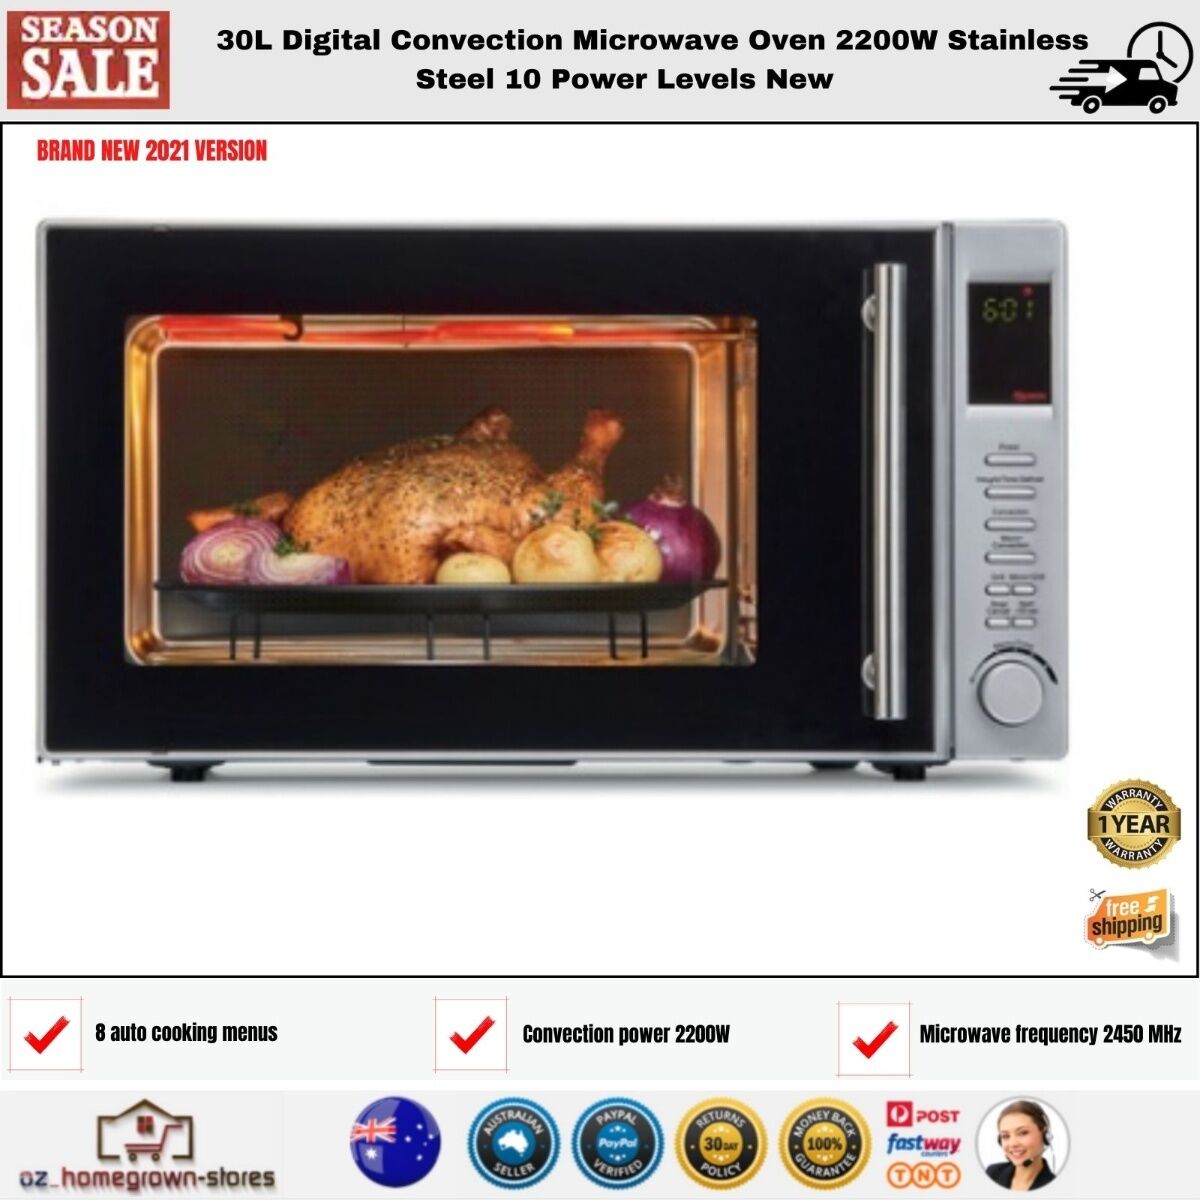 30L Digital Convection Microwave Oven 2200W Stainless Steel 10 Power